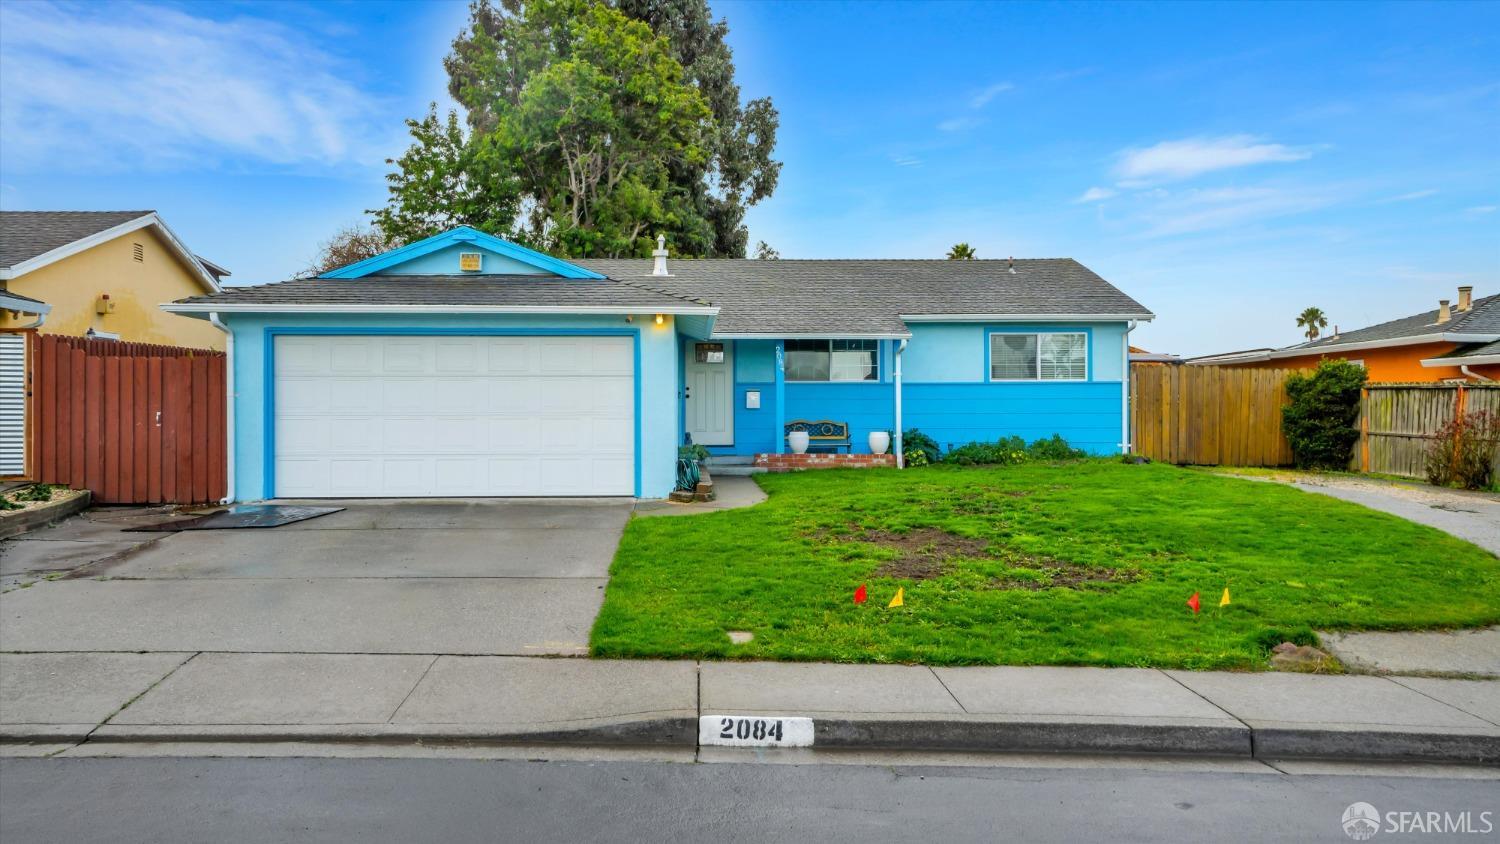 Photo of 2084 Cypress Ave in San Pablo, CA